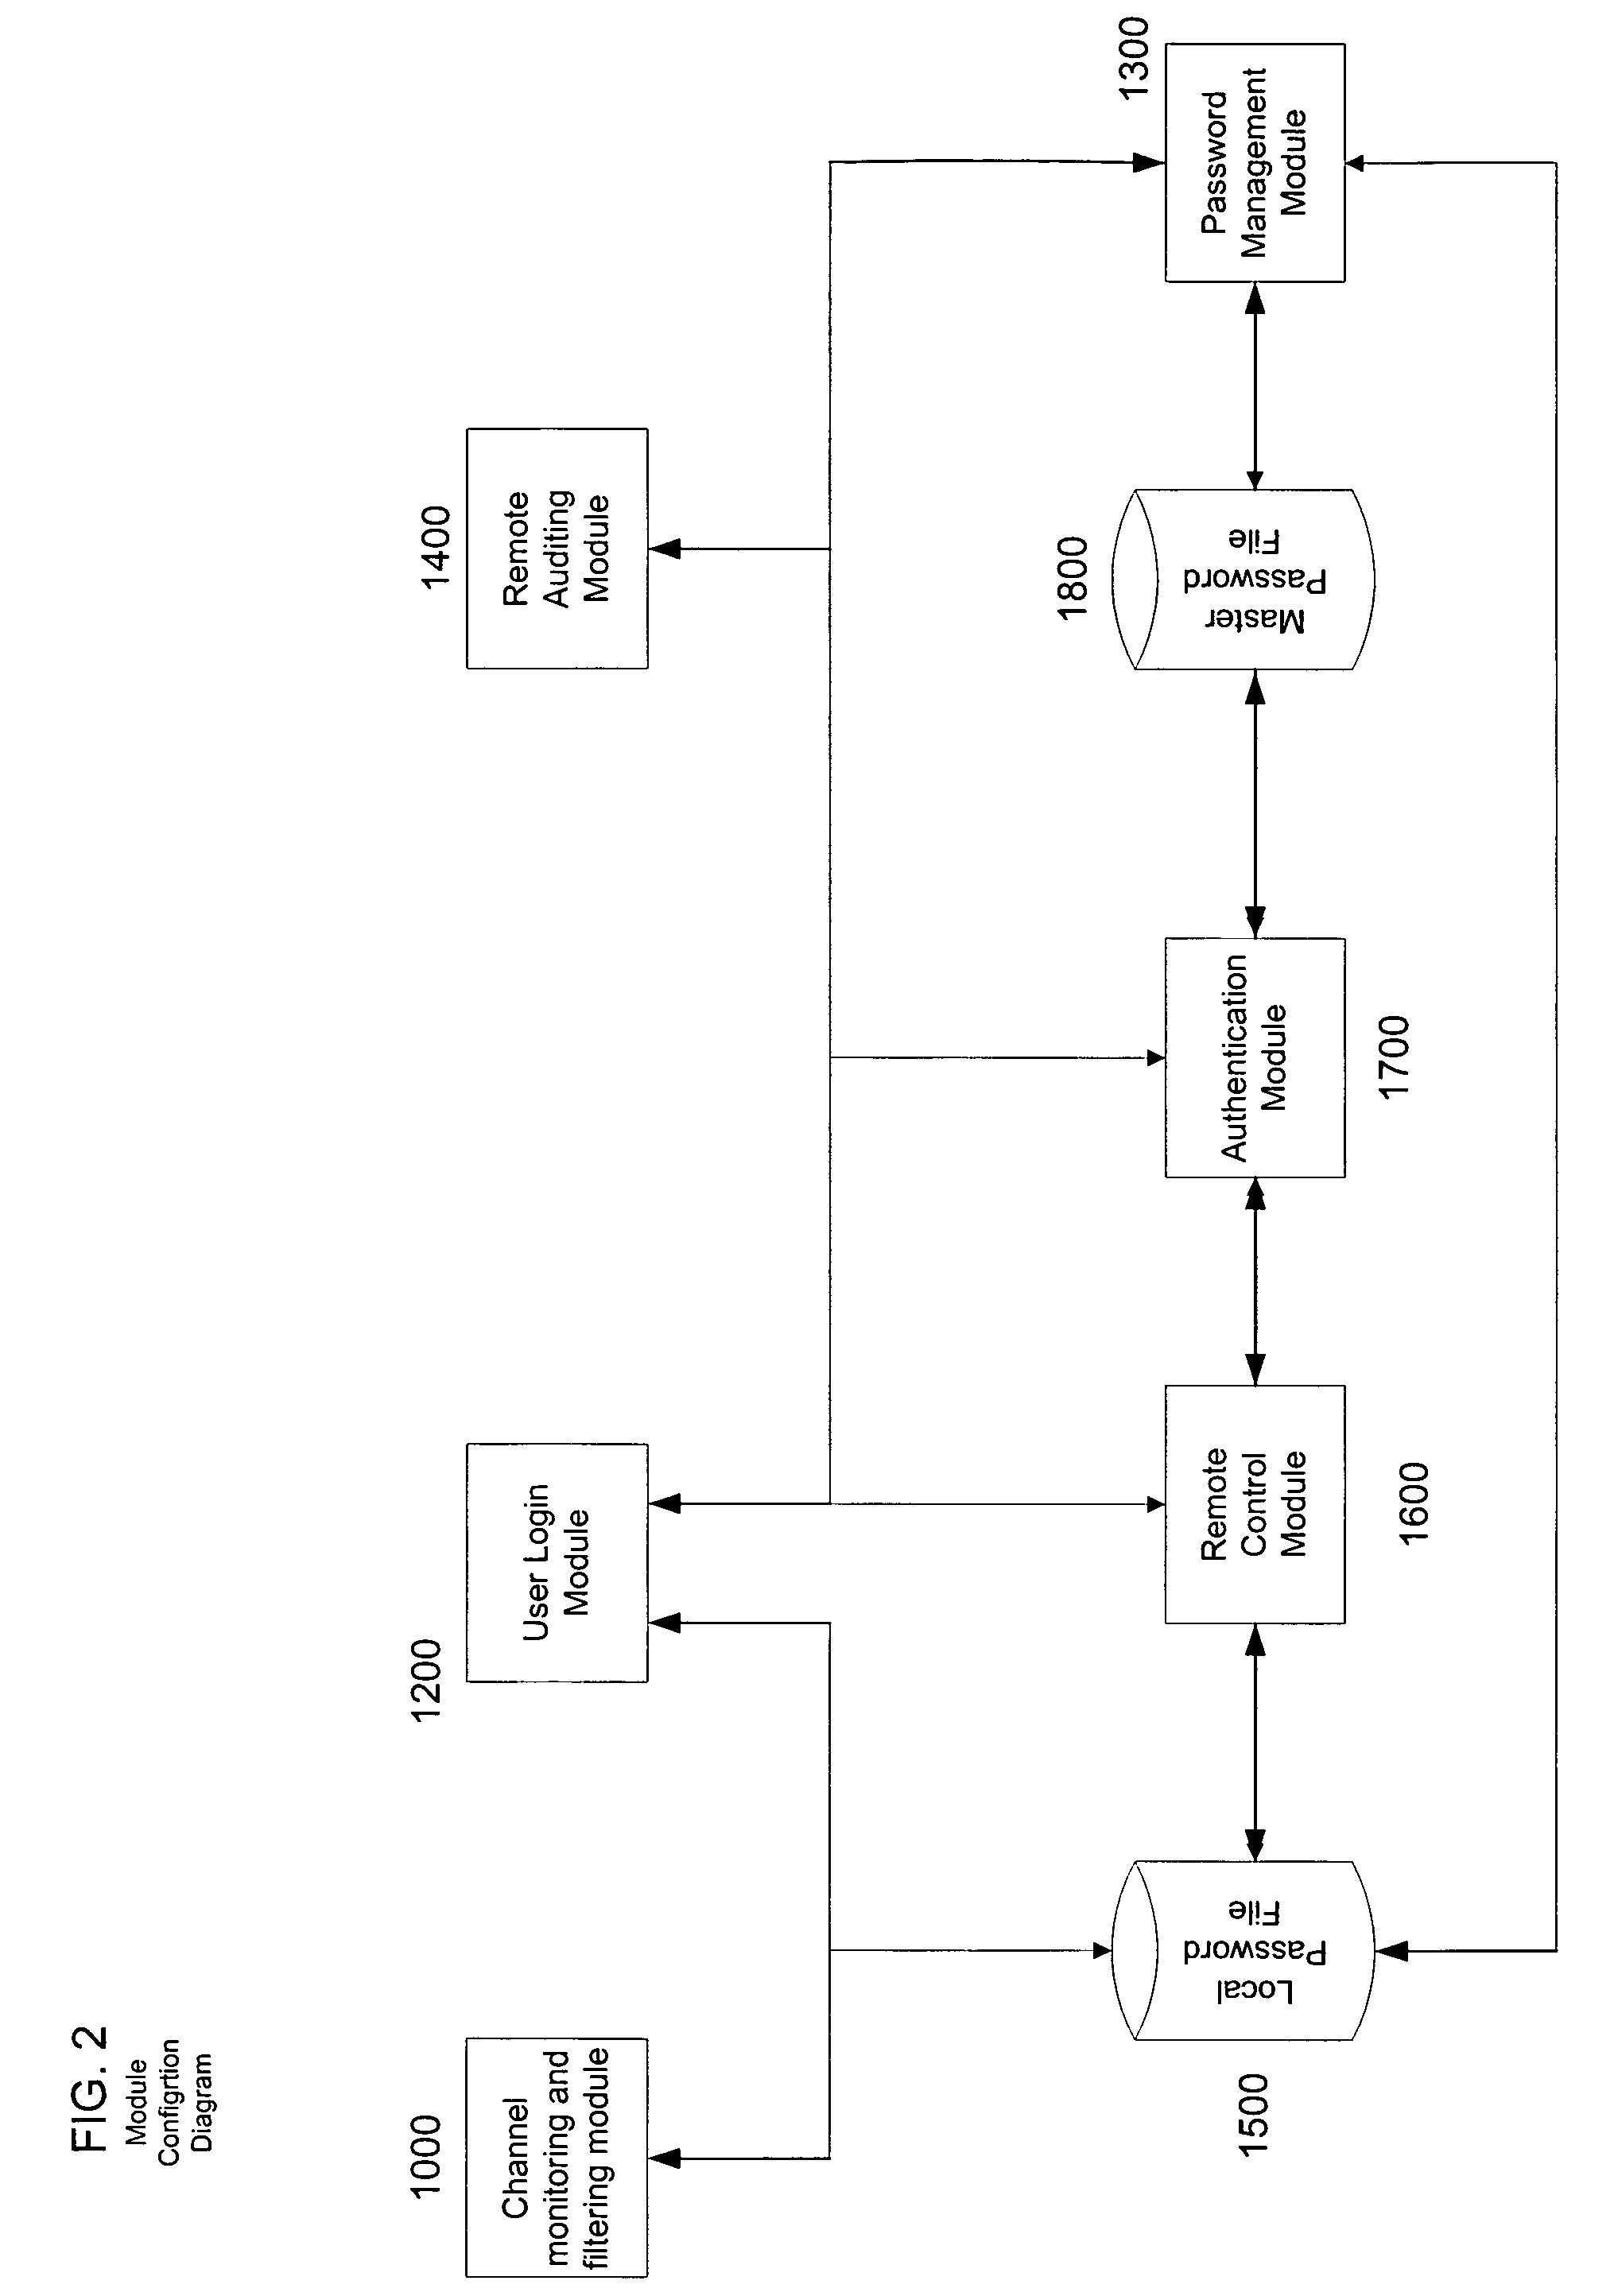 System and method for distributed network acess and control enabling high availability, security and survivability